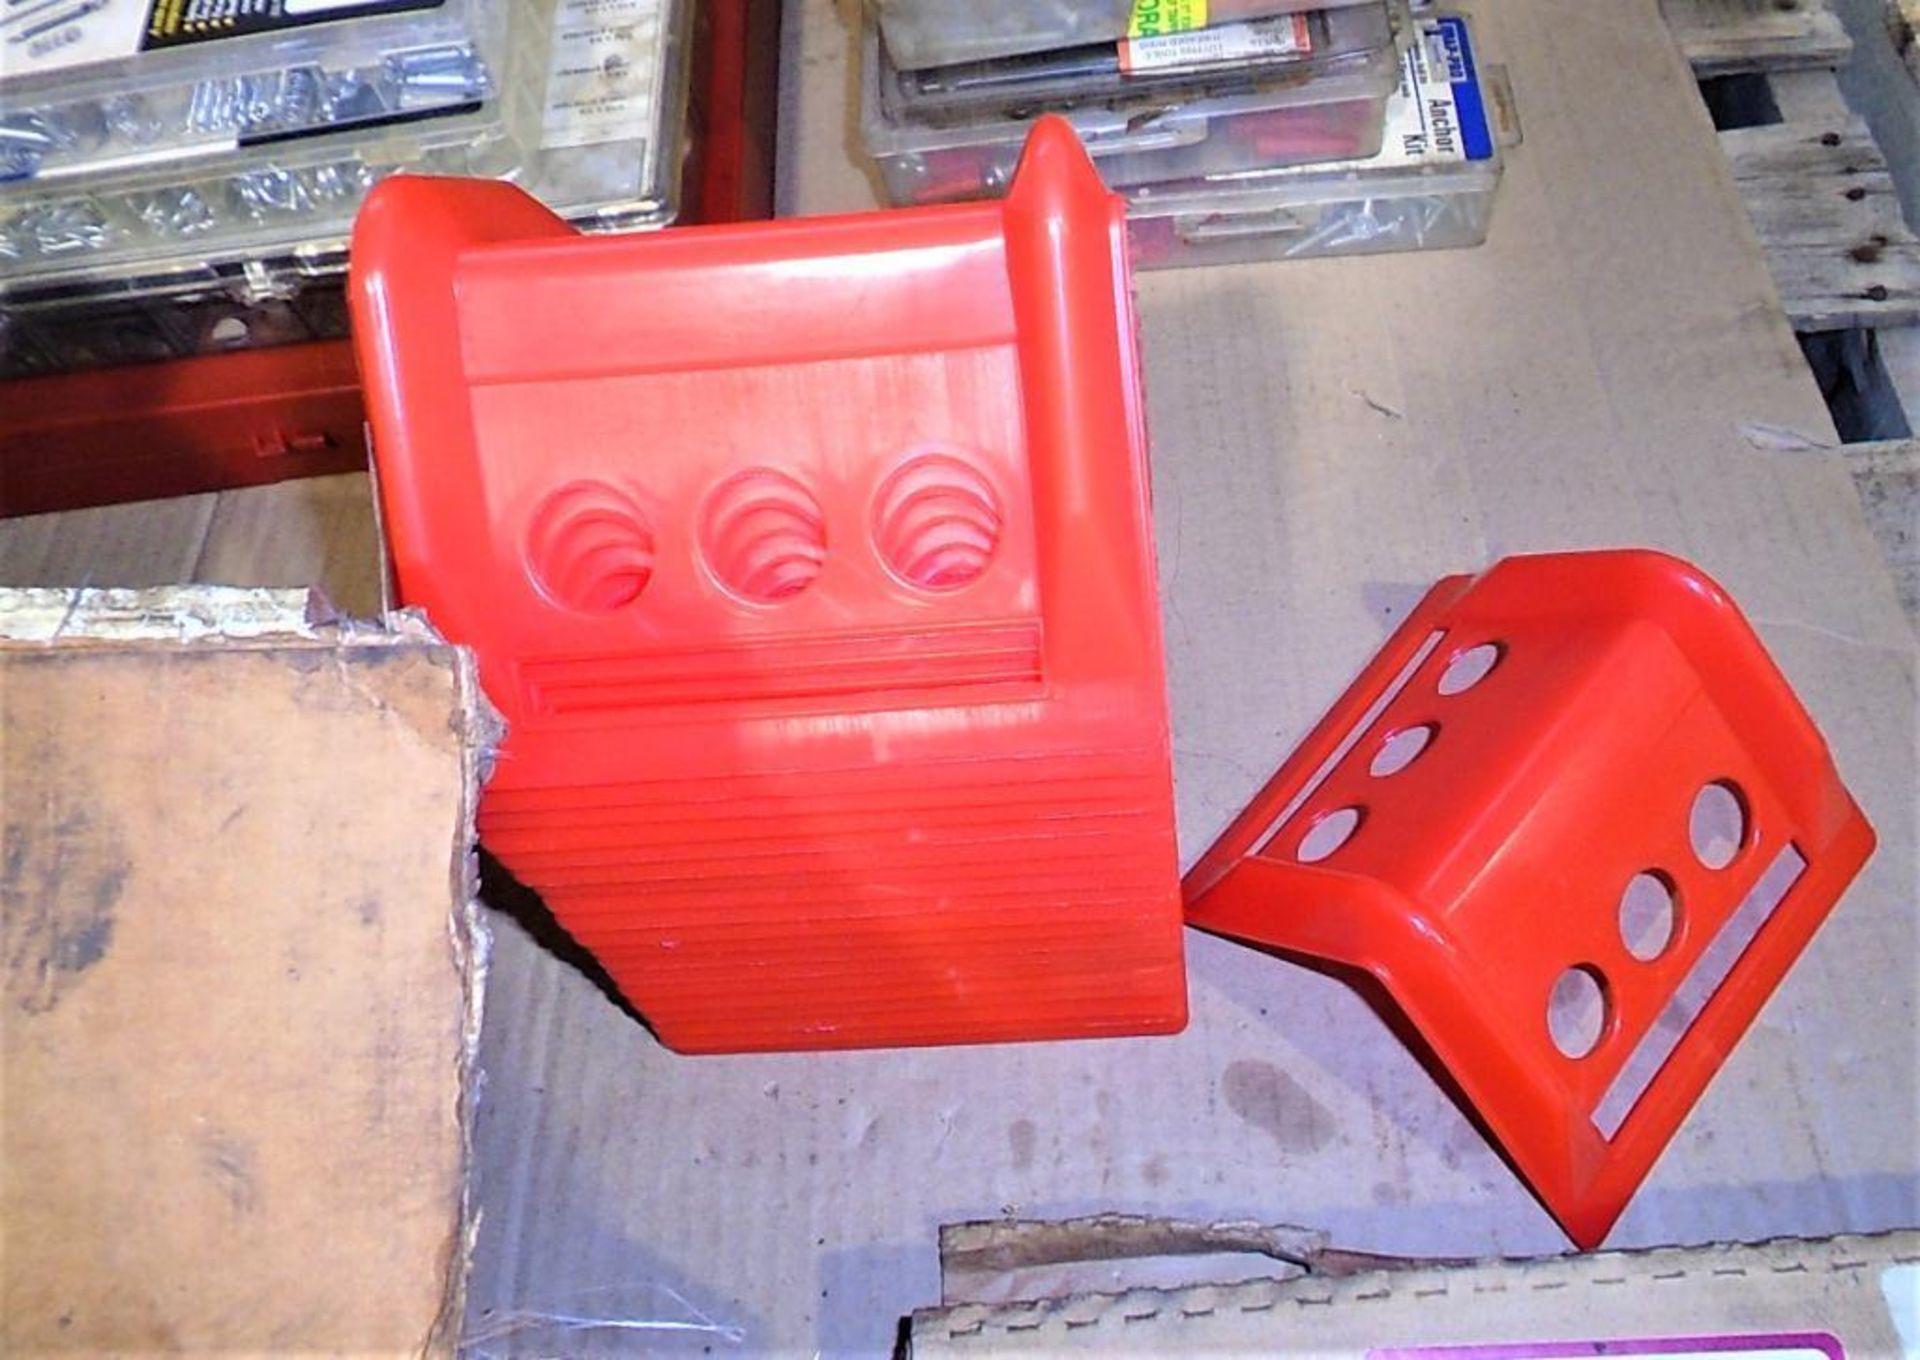 Shipping Seals Corner Guards & Banding as a lot - Image 4 of 4